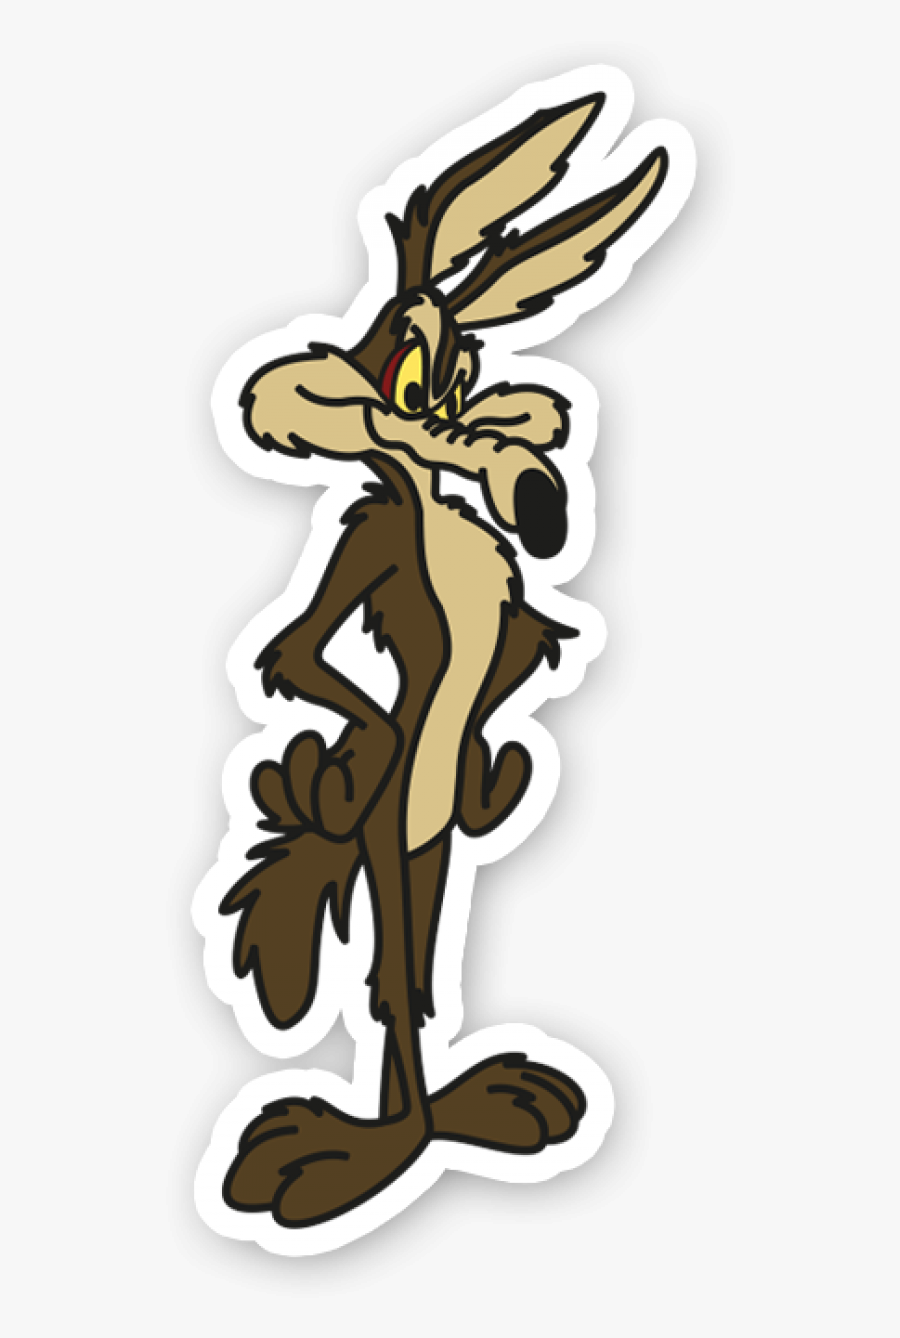 Willy Coyote - Wile E Coyote Hands On Hips, Transparent Clipart